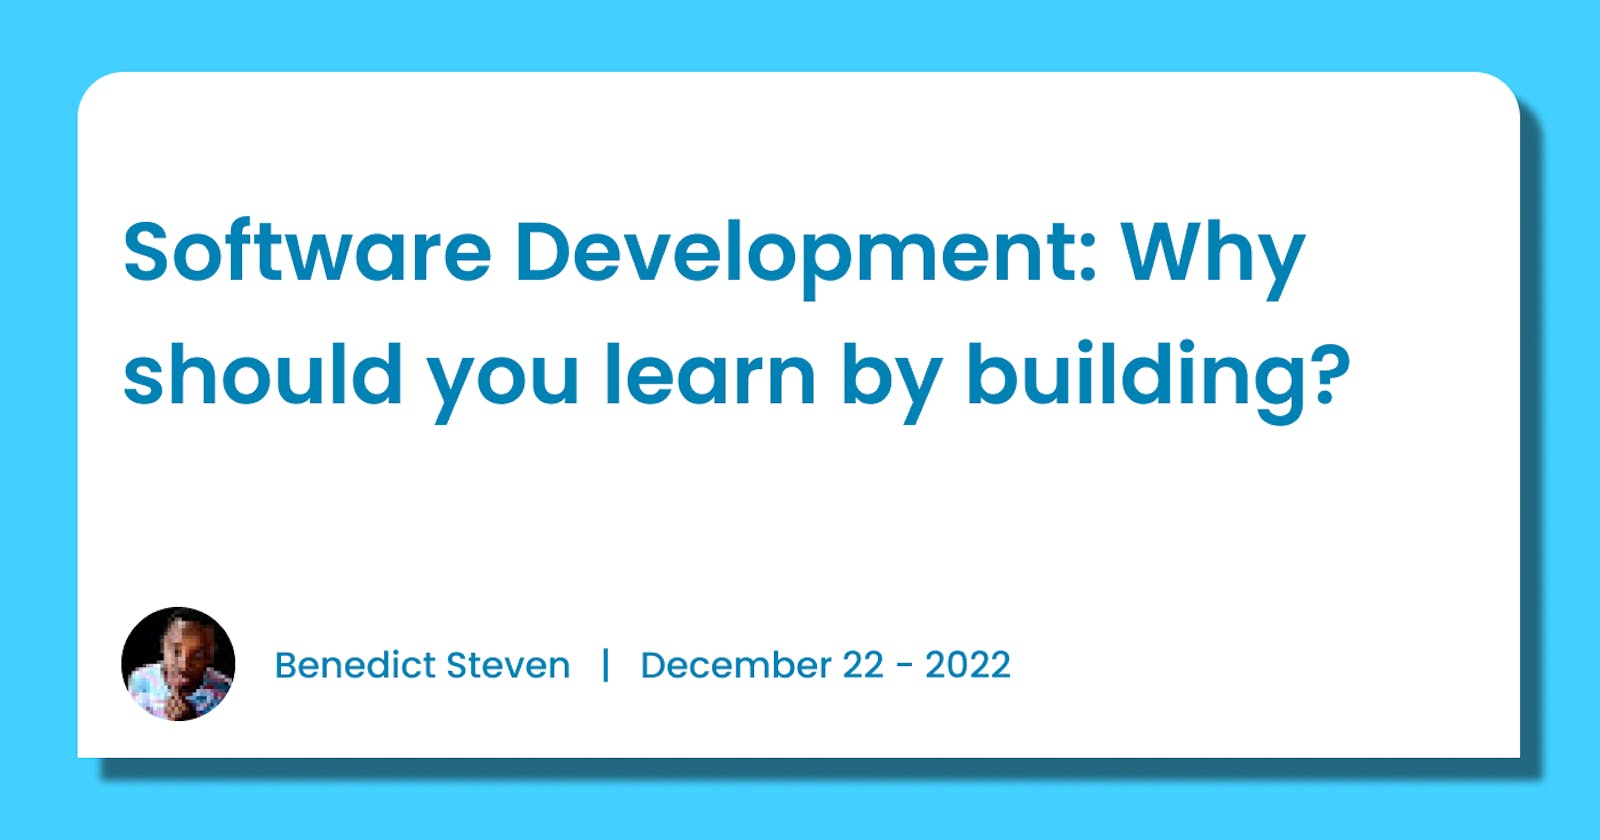 Software Development: Why should you learn by building?